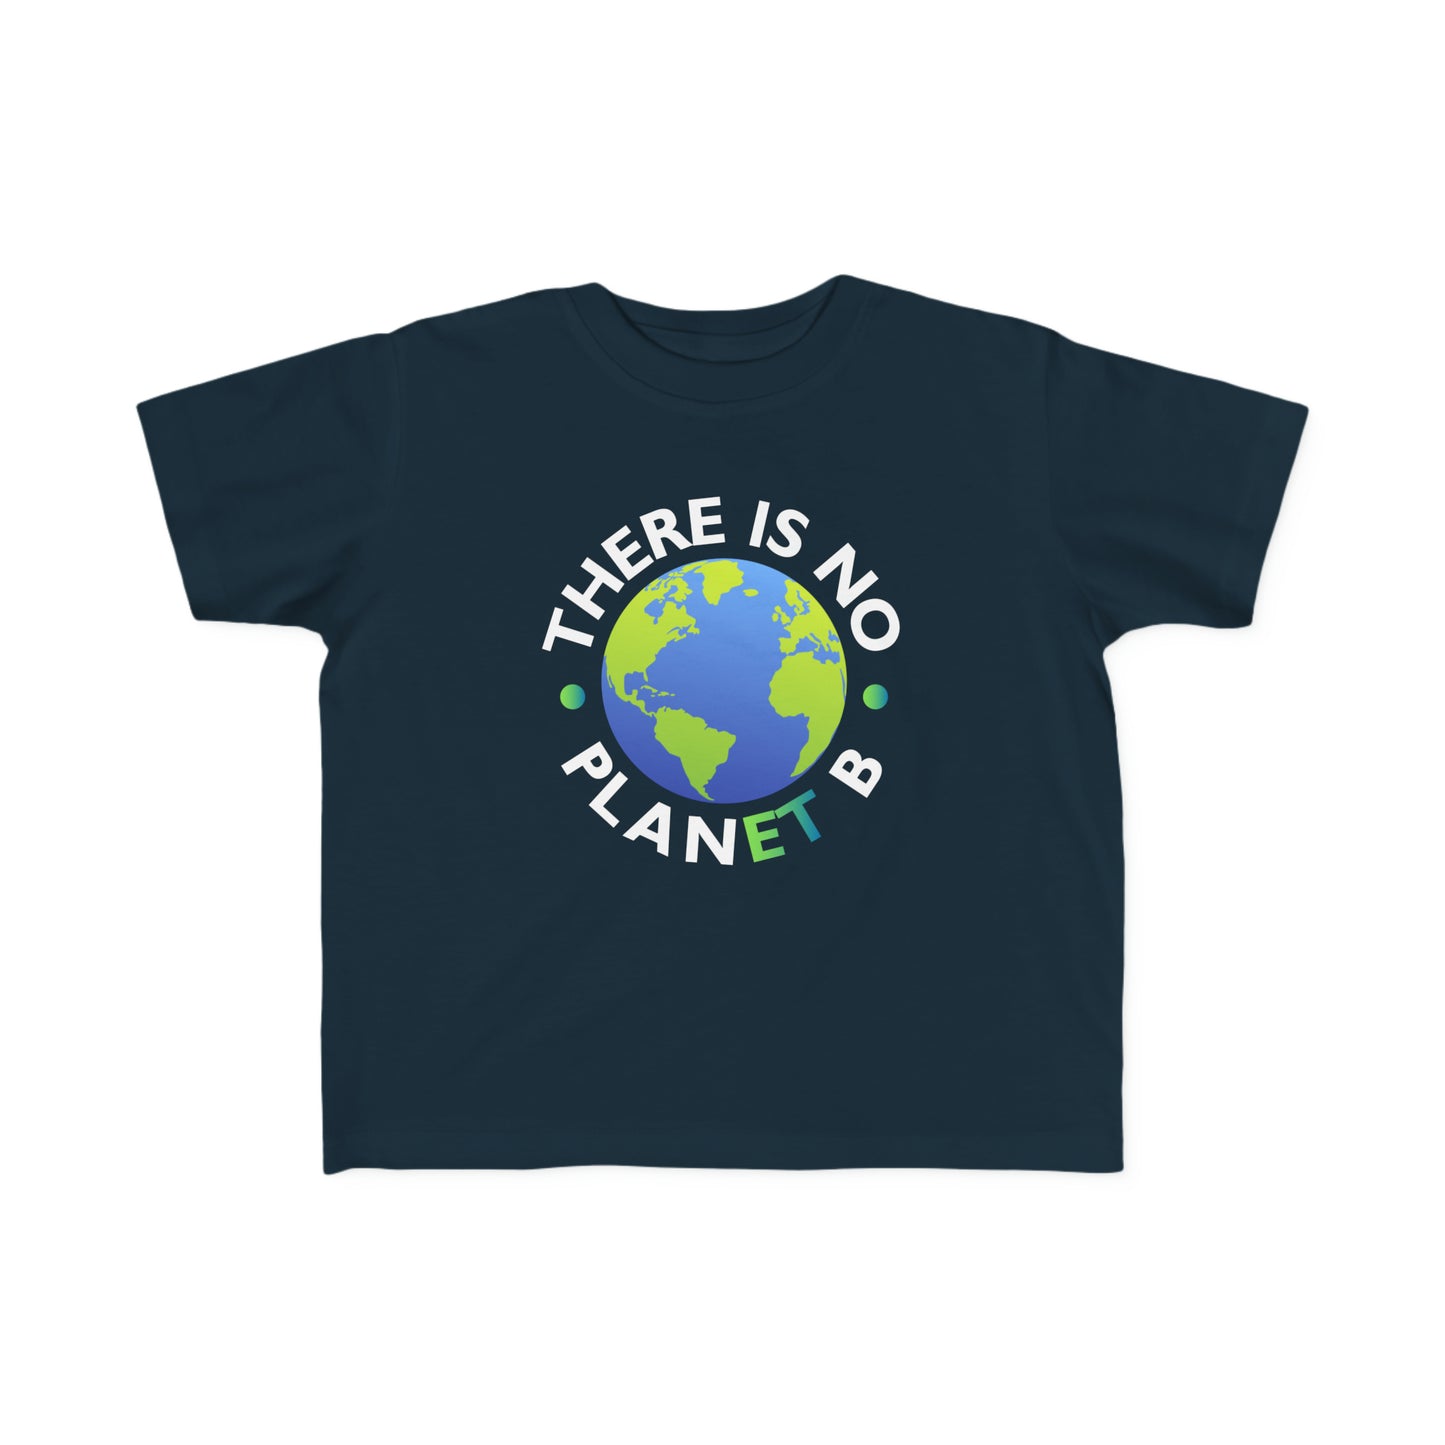 “There Is No Planet B” Toddler's Tee